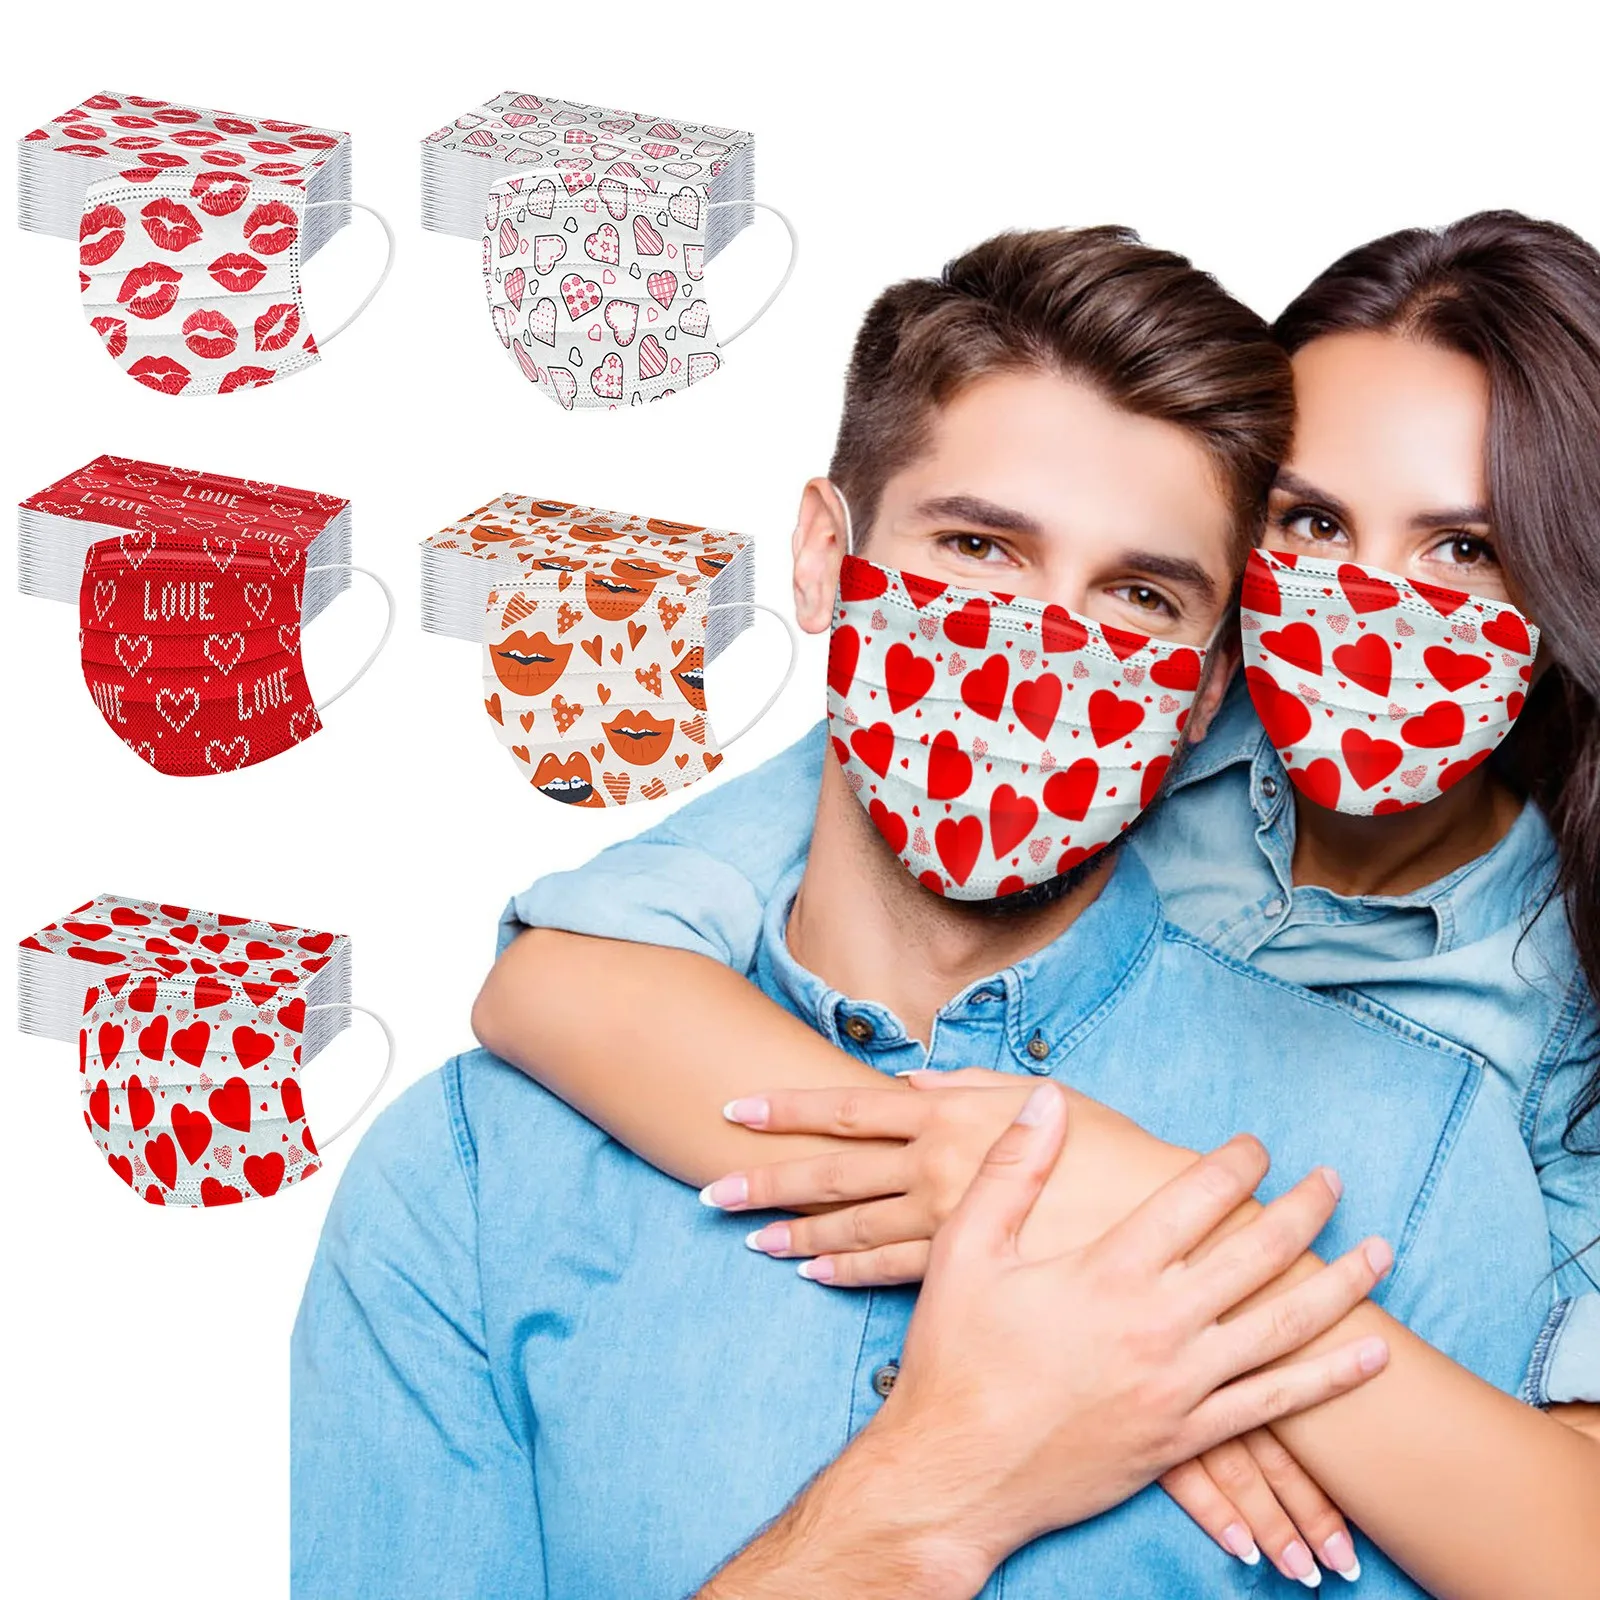 cowboy cosplay 50pc Valentine Day Disposable Mask Non-woven Heart Love Print Dust Protective Masks Adult Fabric Masque Halloween Cosplay Mask simple halloween costumes